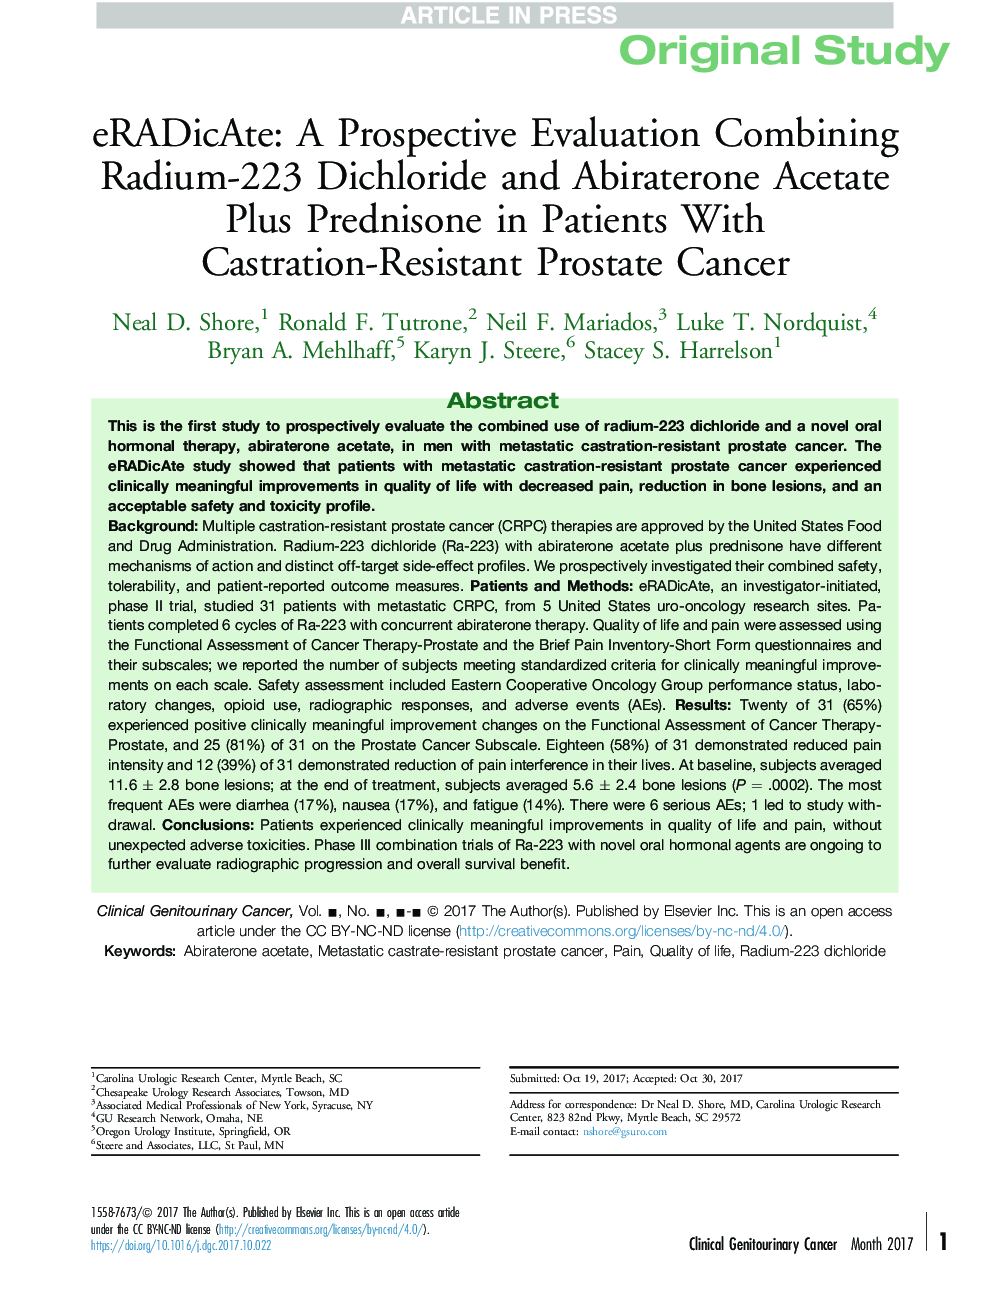 eRADicAte: A Prospective Evaluation Combining Radium-223 Dichloride and Abiraterone Acetate Plus Prednisone in Patients With Castration-Resistant Prostate Cancer